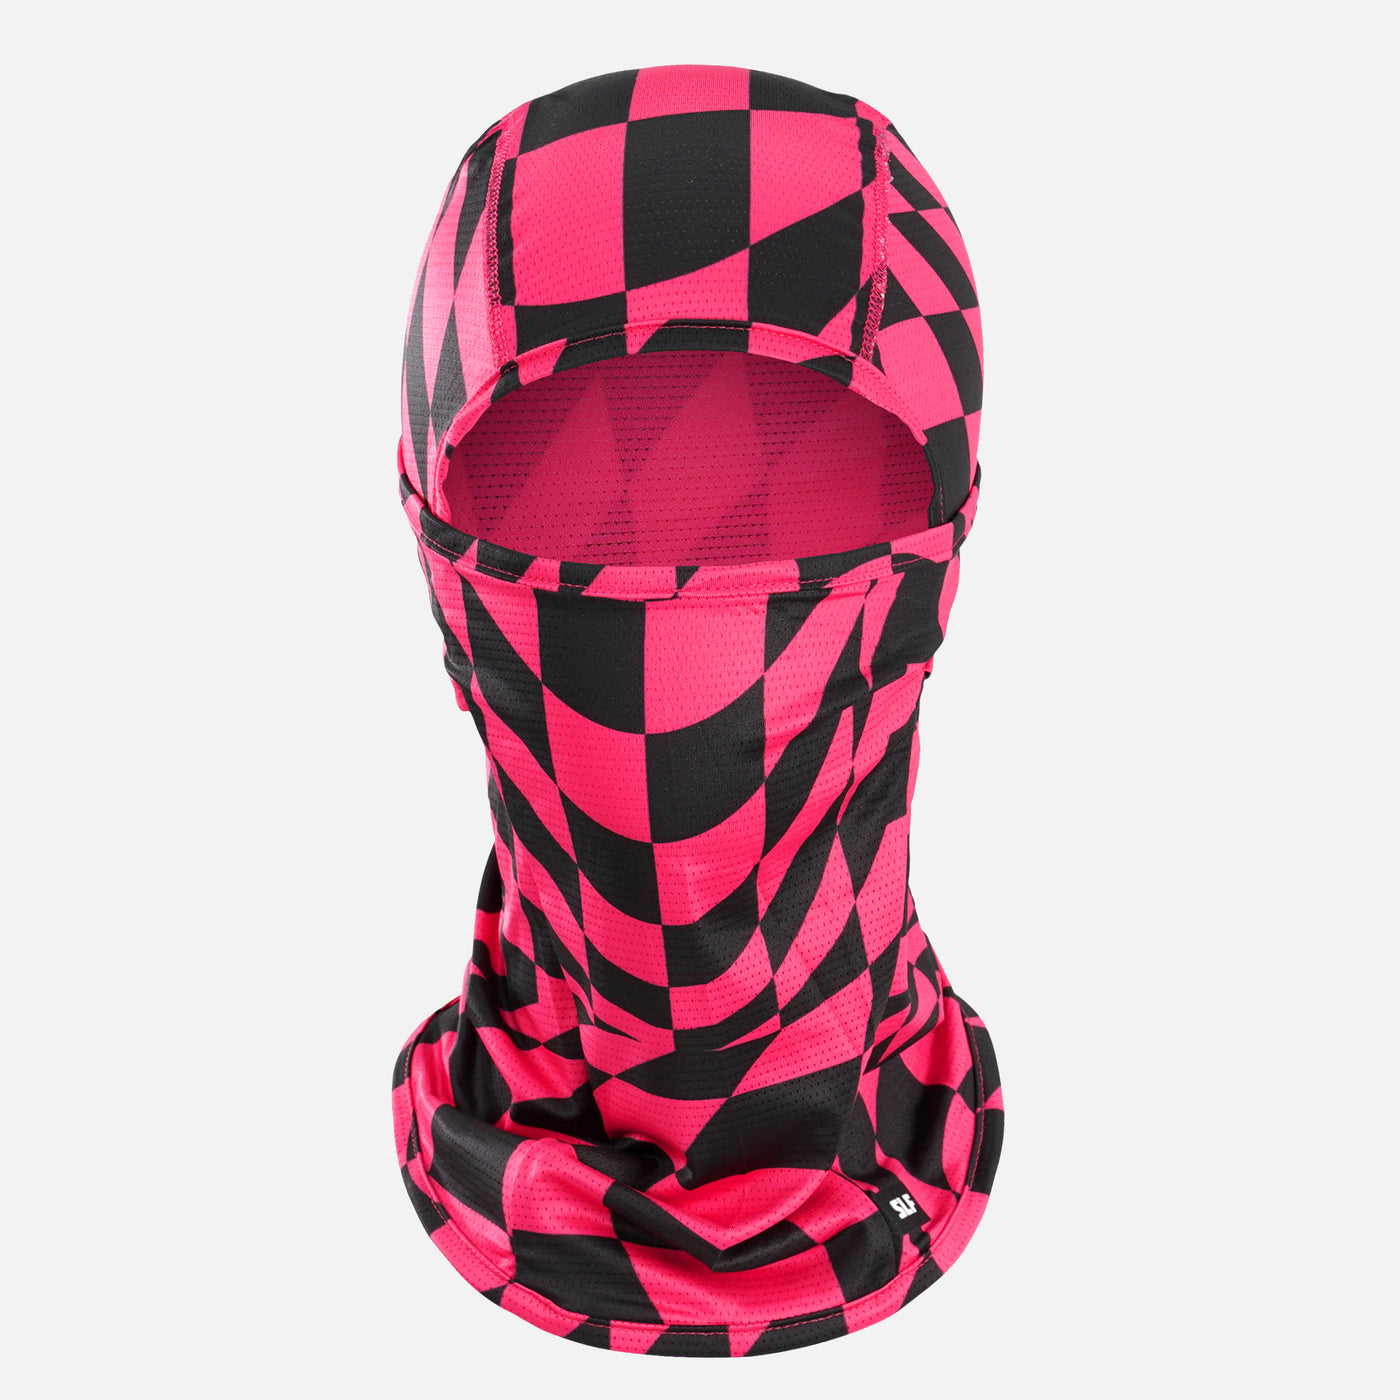 Pink Warped Checkered Loose-fitting Shiesty Mask